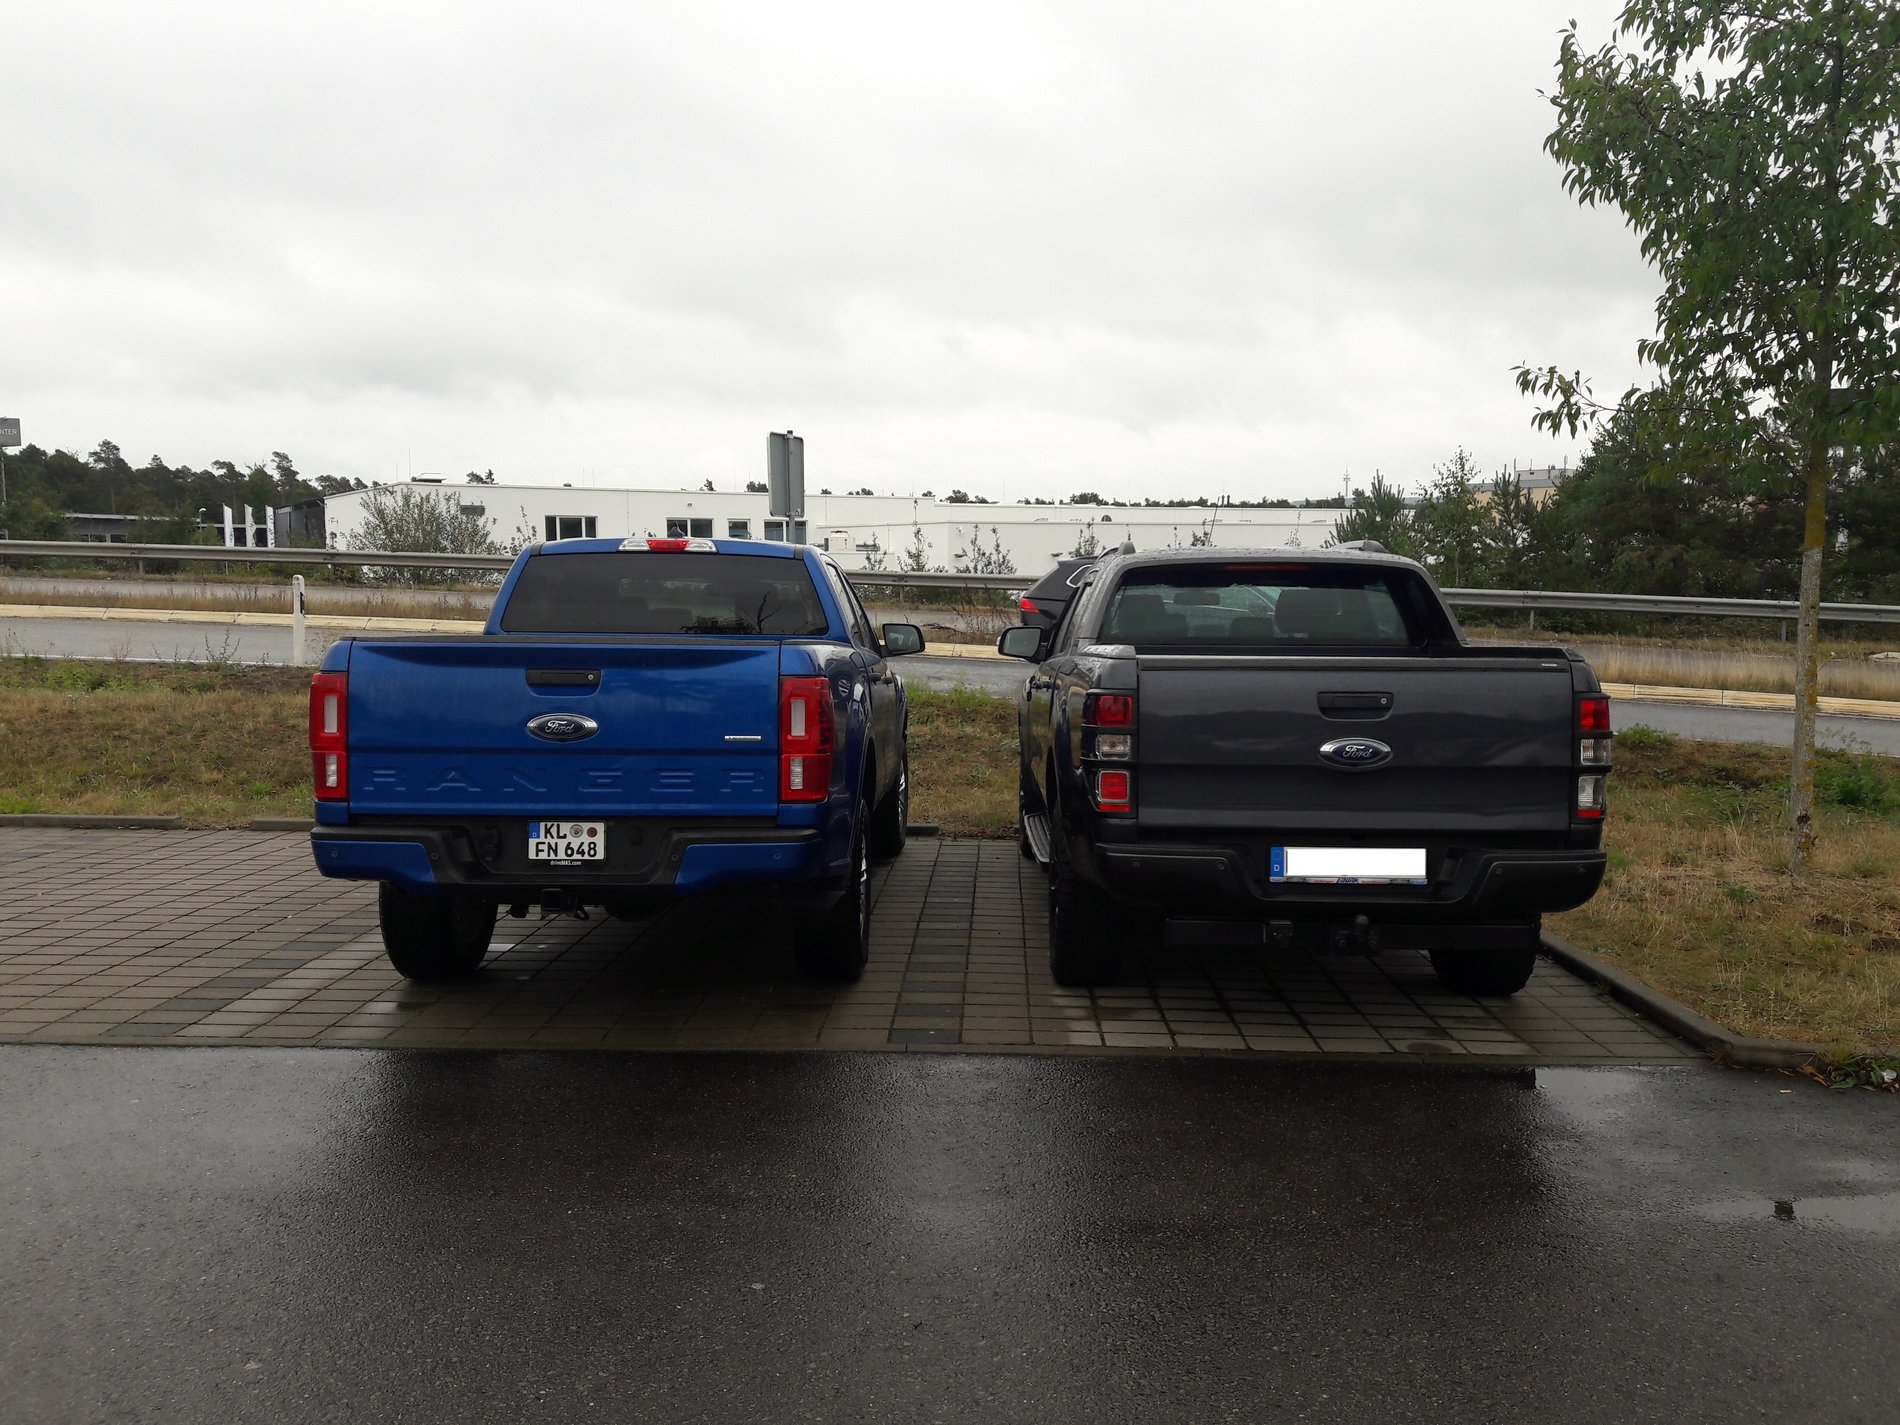 Ford Ranger Look at my Ranger parked next to stuff 20190907_120335